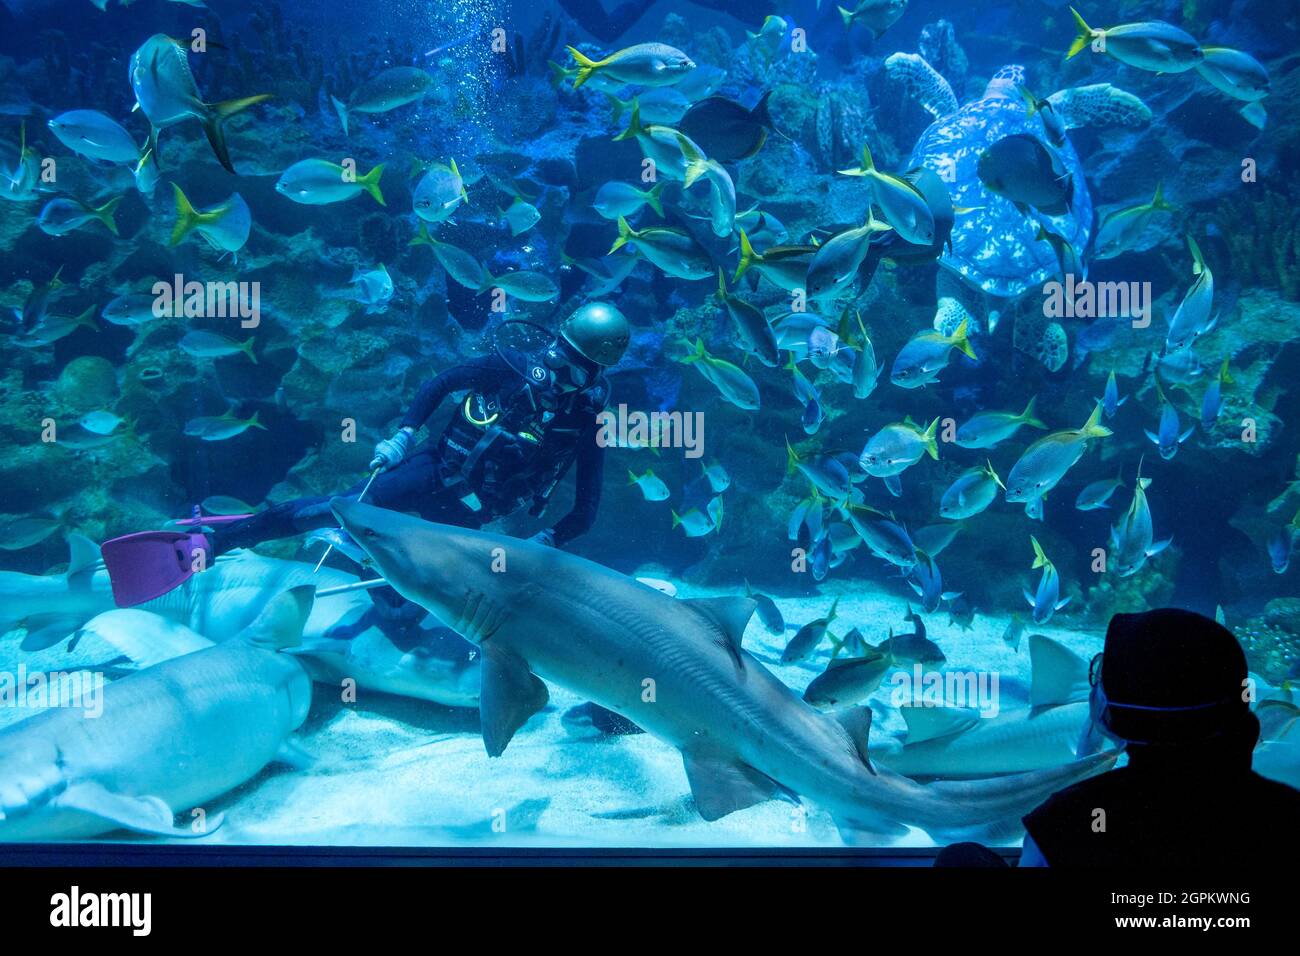 Kuala Lumpur, Malaysia. 29th Sep, 2021. A diver feeds a shark at Aquaria KLCC in Kuala Lumpur, Malaysia, Sept. 29, 2021. Aquaria KLCC will be open for fully vaccinated visitors starting from Oct. 1. Credit: Chong Voon Chung/Xinhua/Alamy Live News Stock Photo